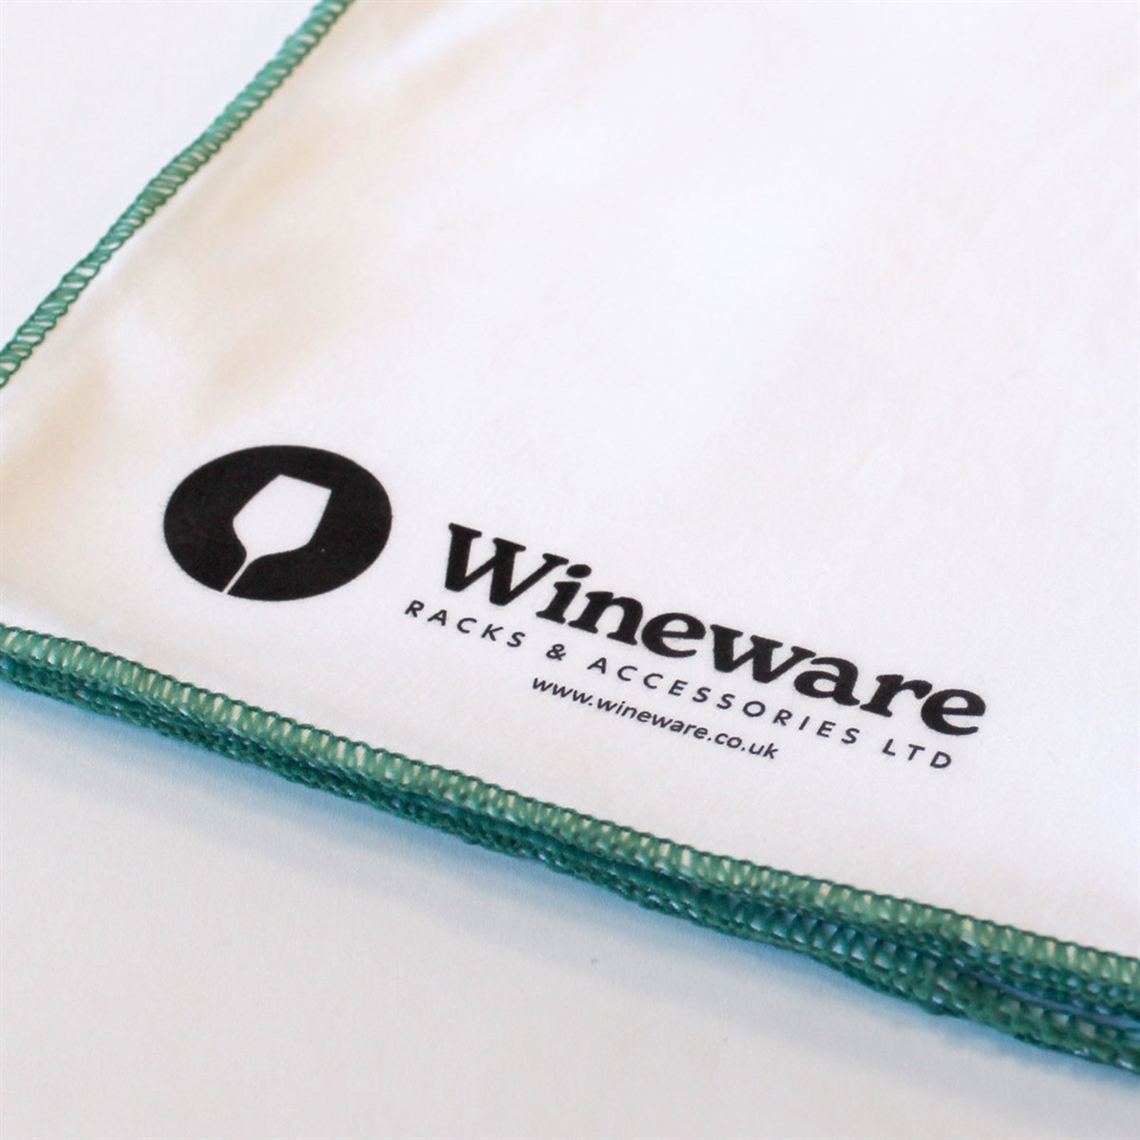 View more how to taste wine - a complete guide  from our Wine Glass Cleaning & Accessories range